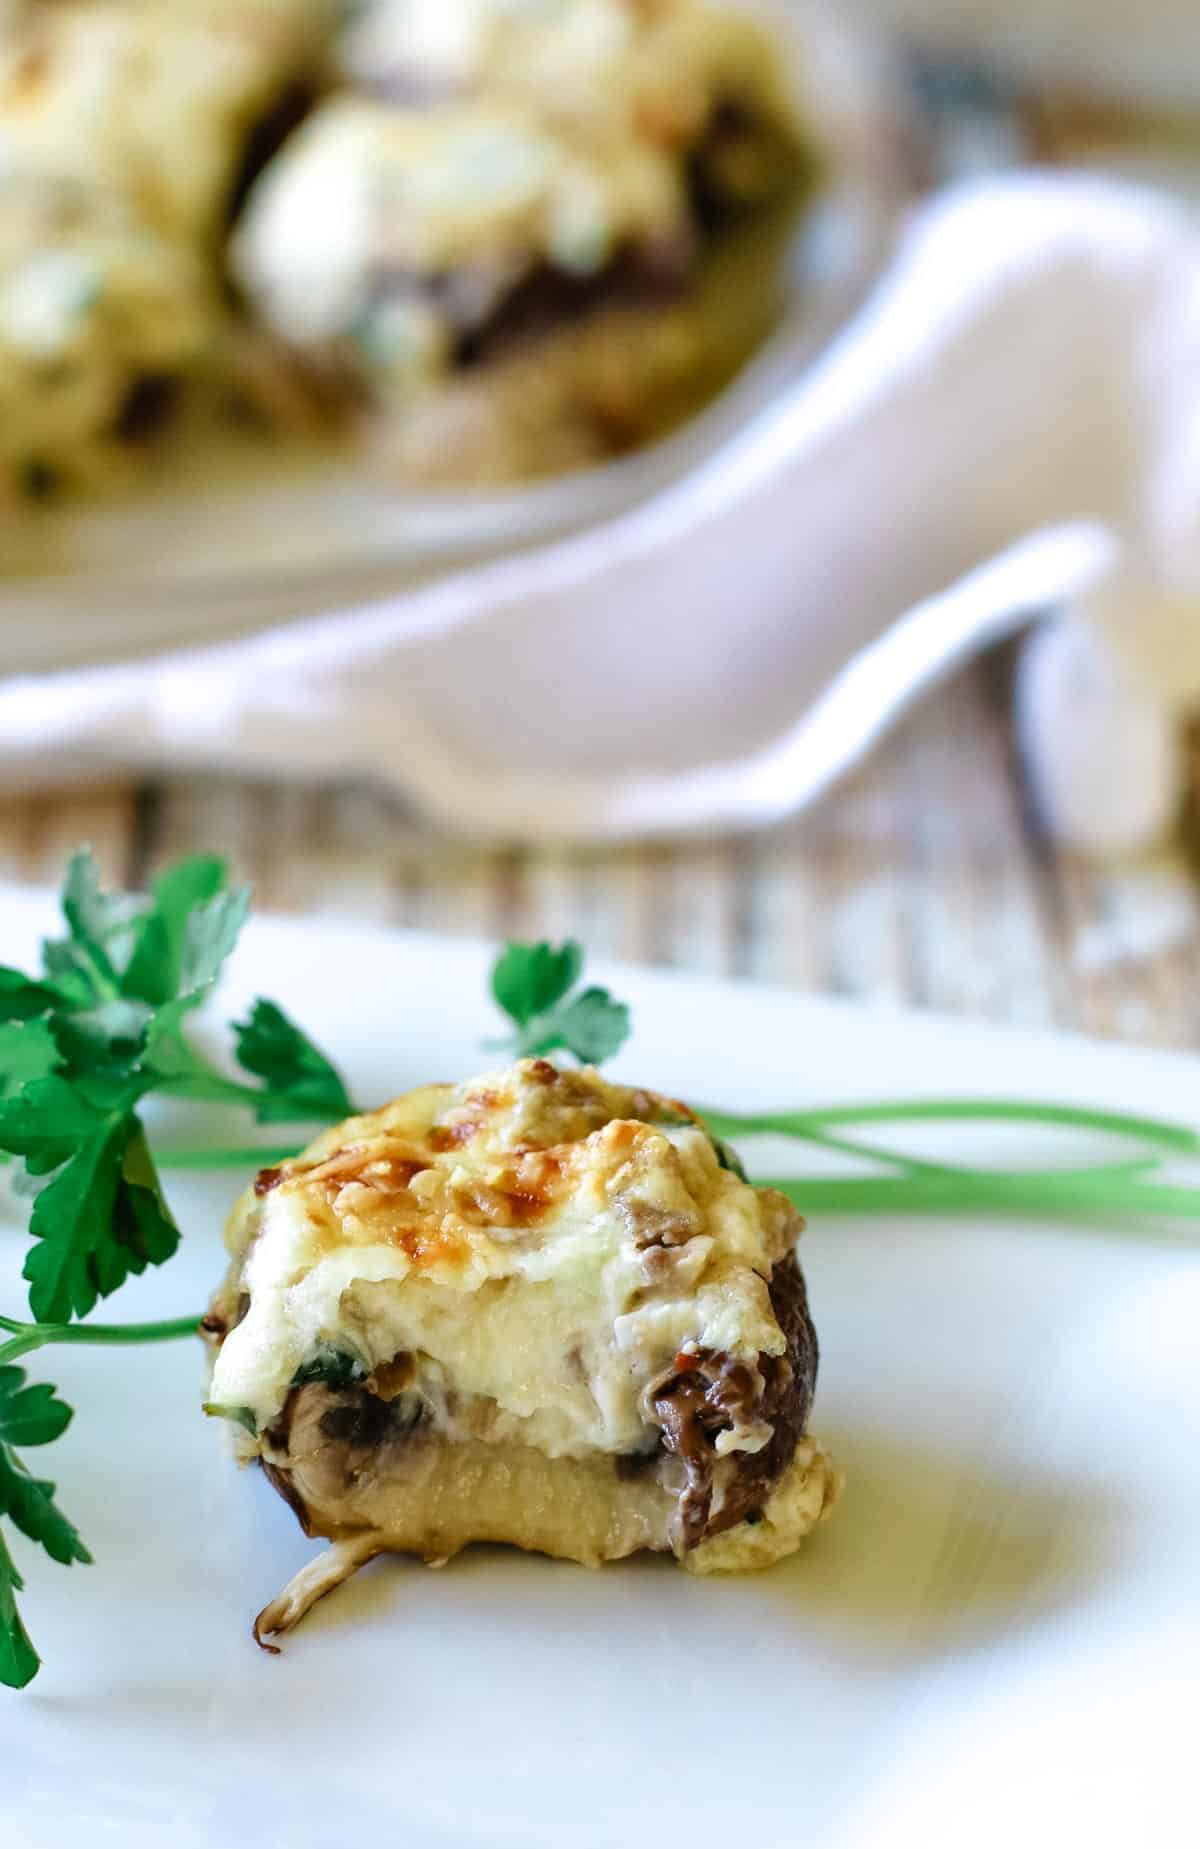 A stuffed mushroom on a white plate with platter of mushrooms in the background.